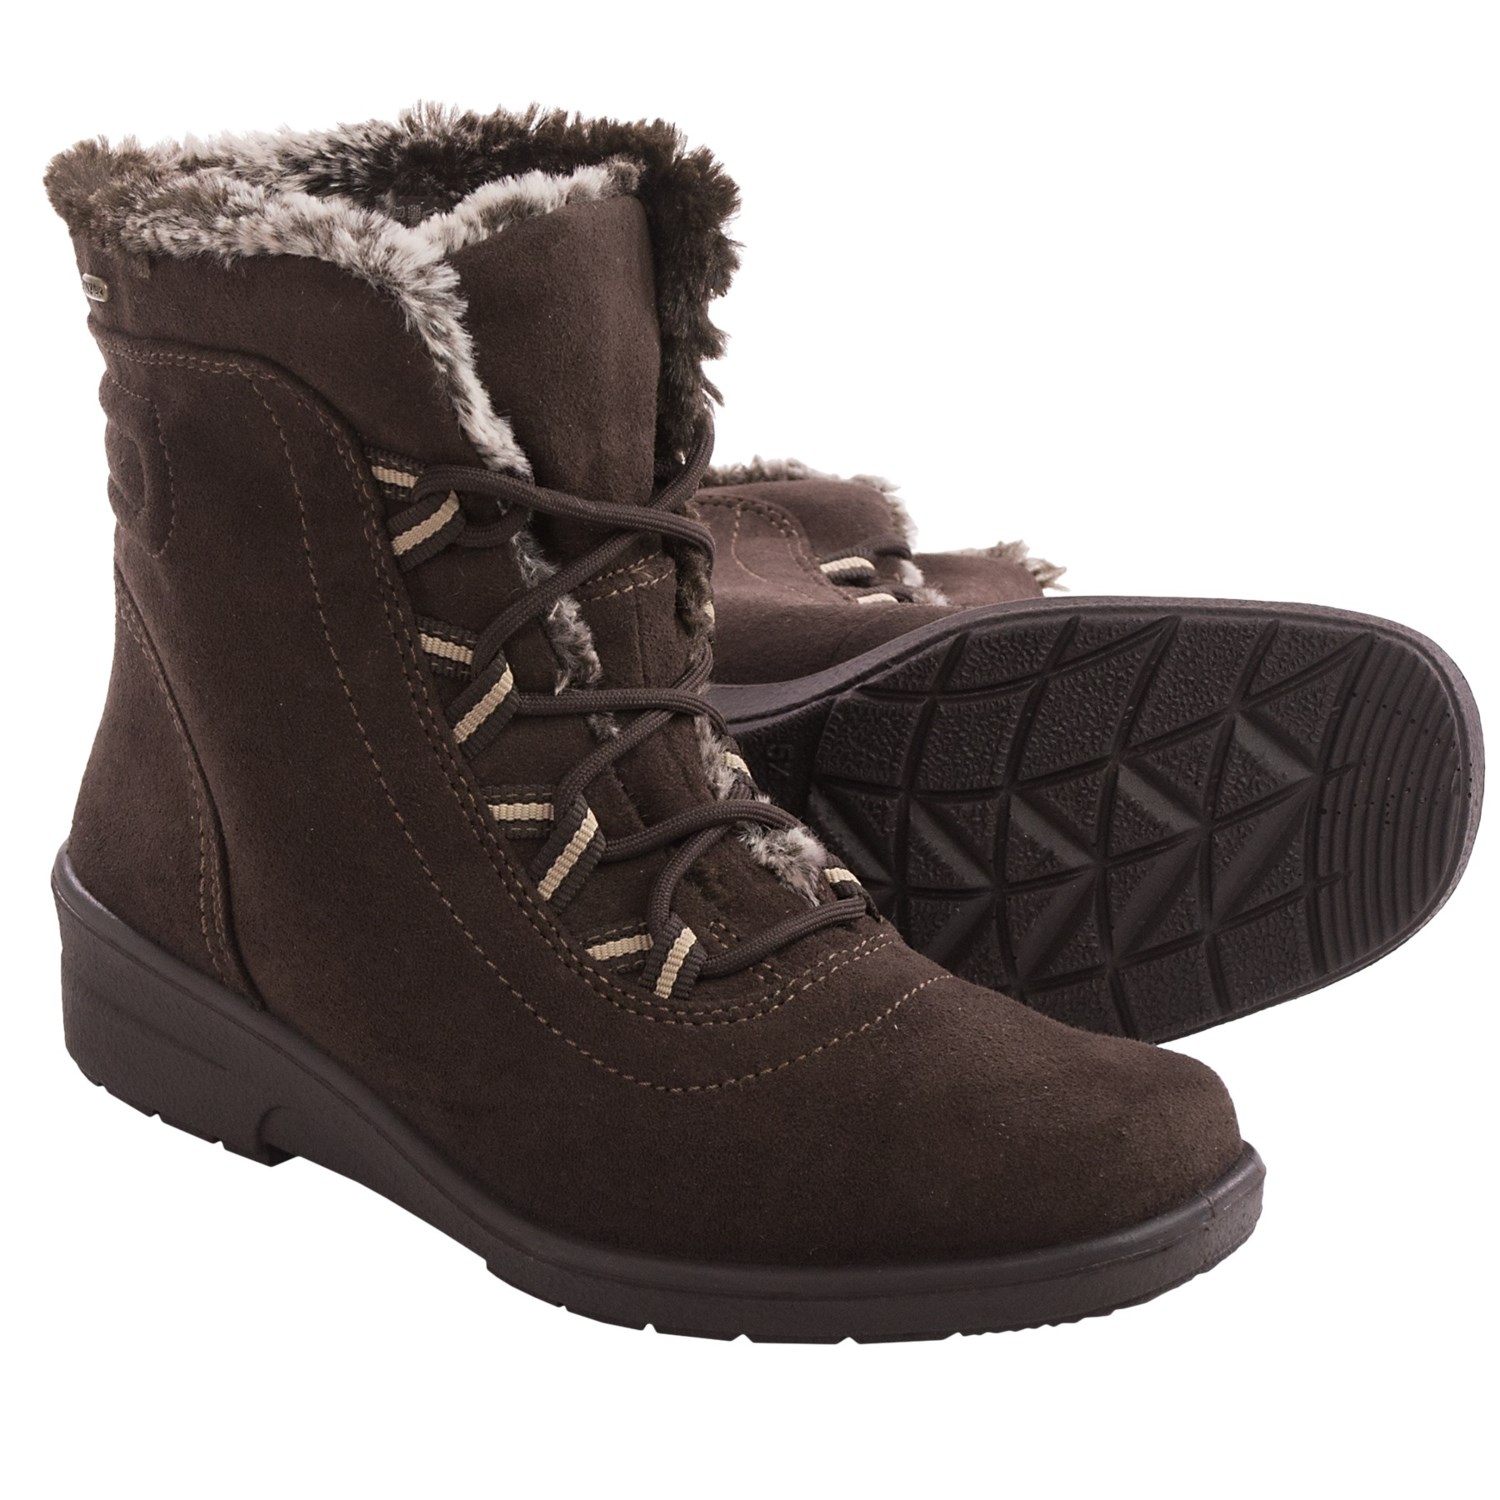 Jenny Munchen Snow Boots (For Women) - Save 83%